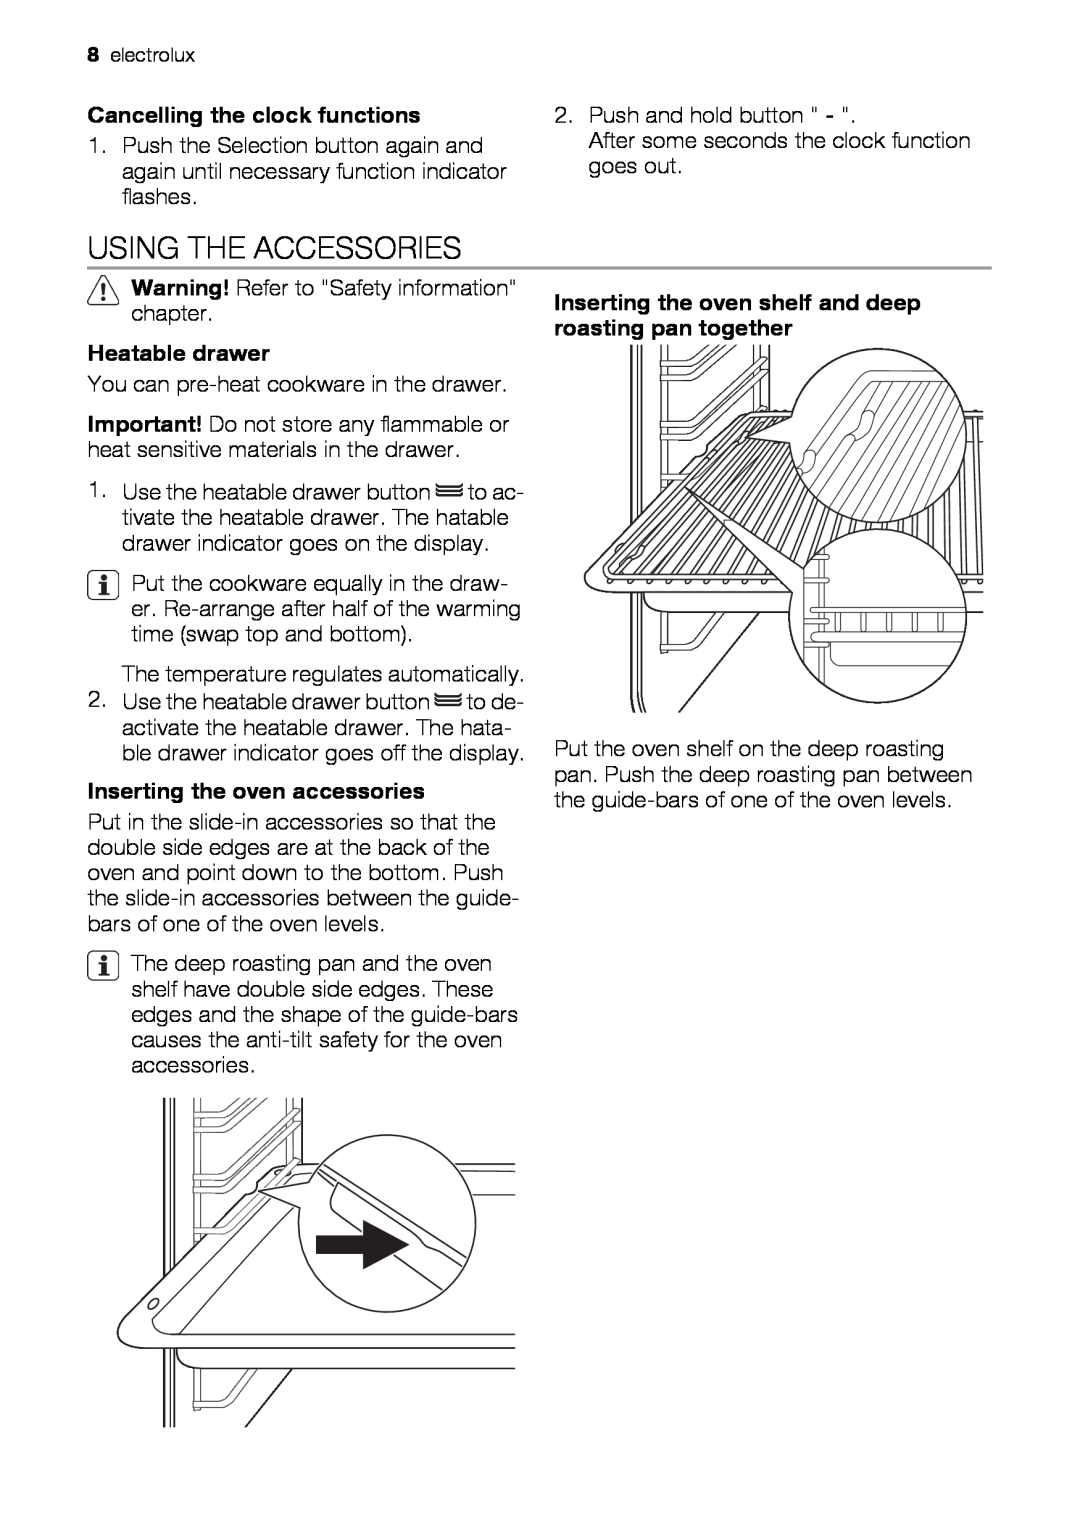 Electrolux EH GL5X-4 user manual Using The Accessories, Cancelling the clock functions, Inserting the oven accessories 